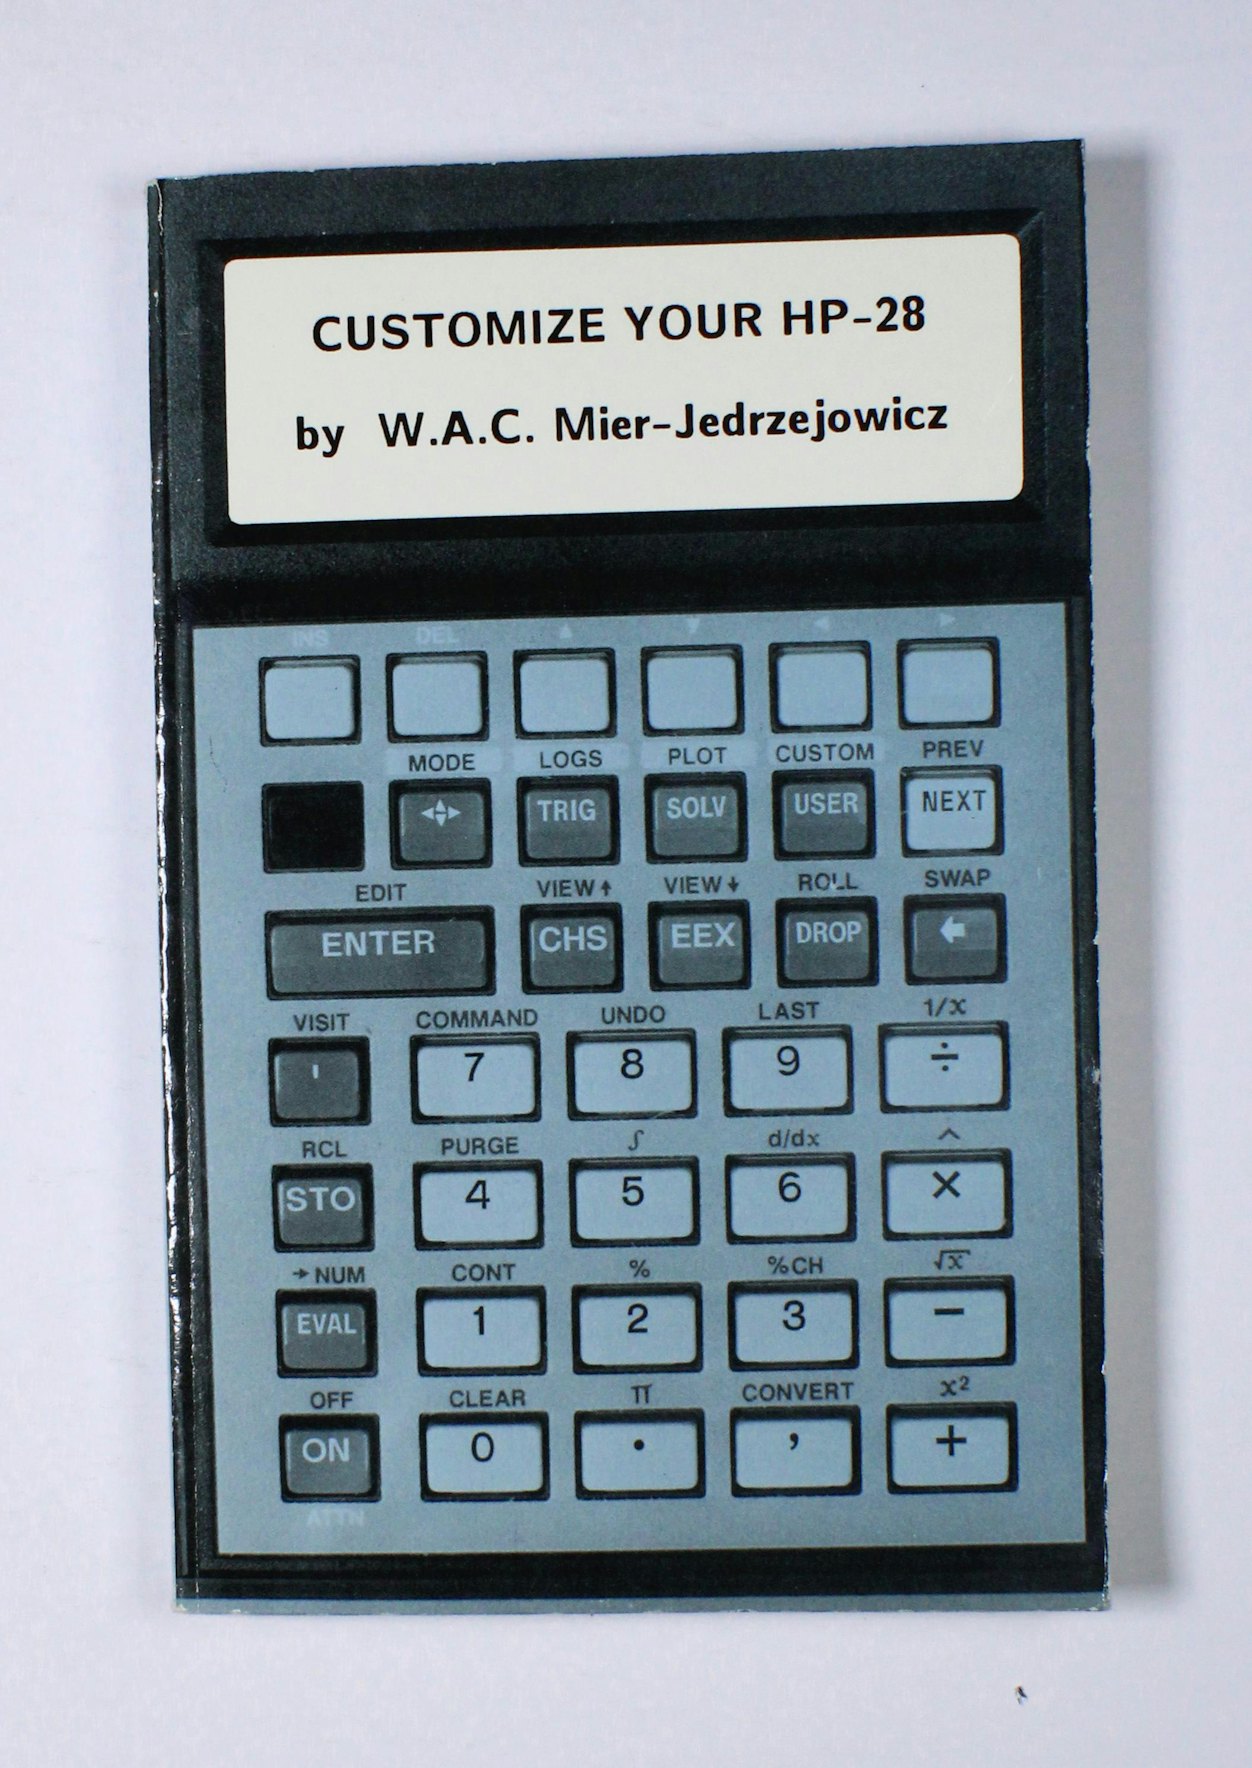 Customize Your HP-28